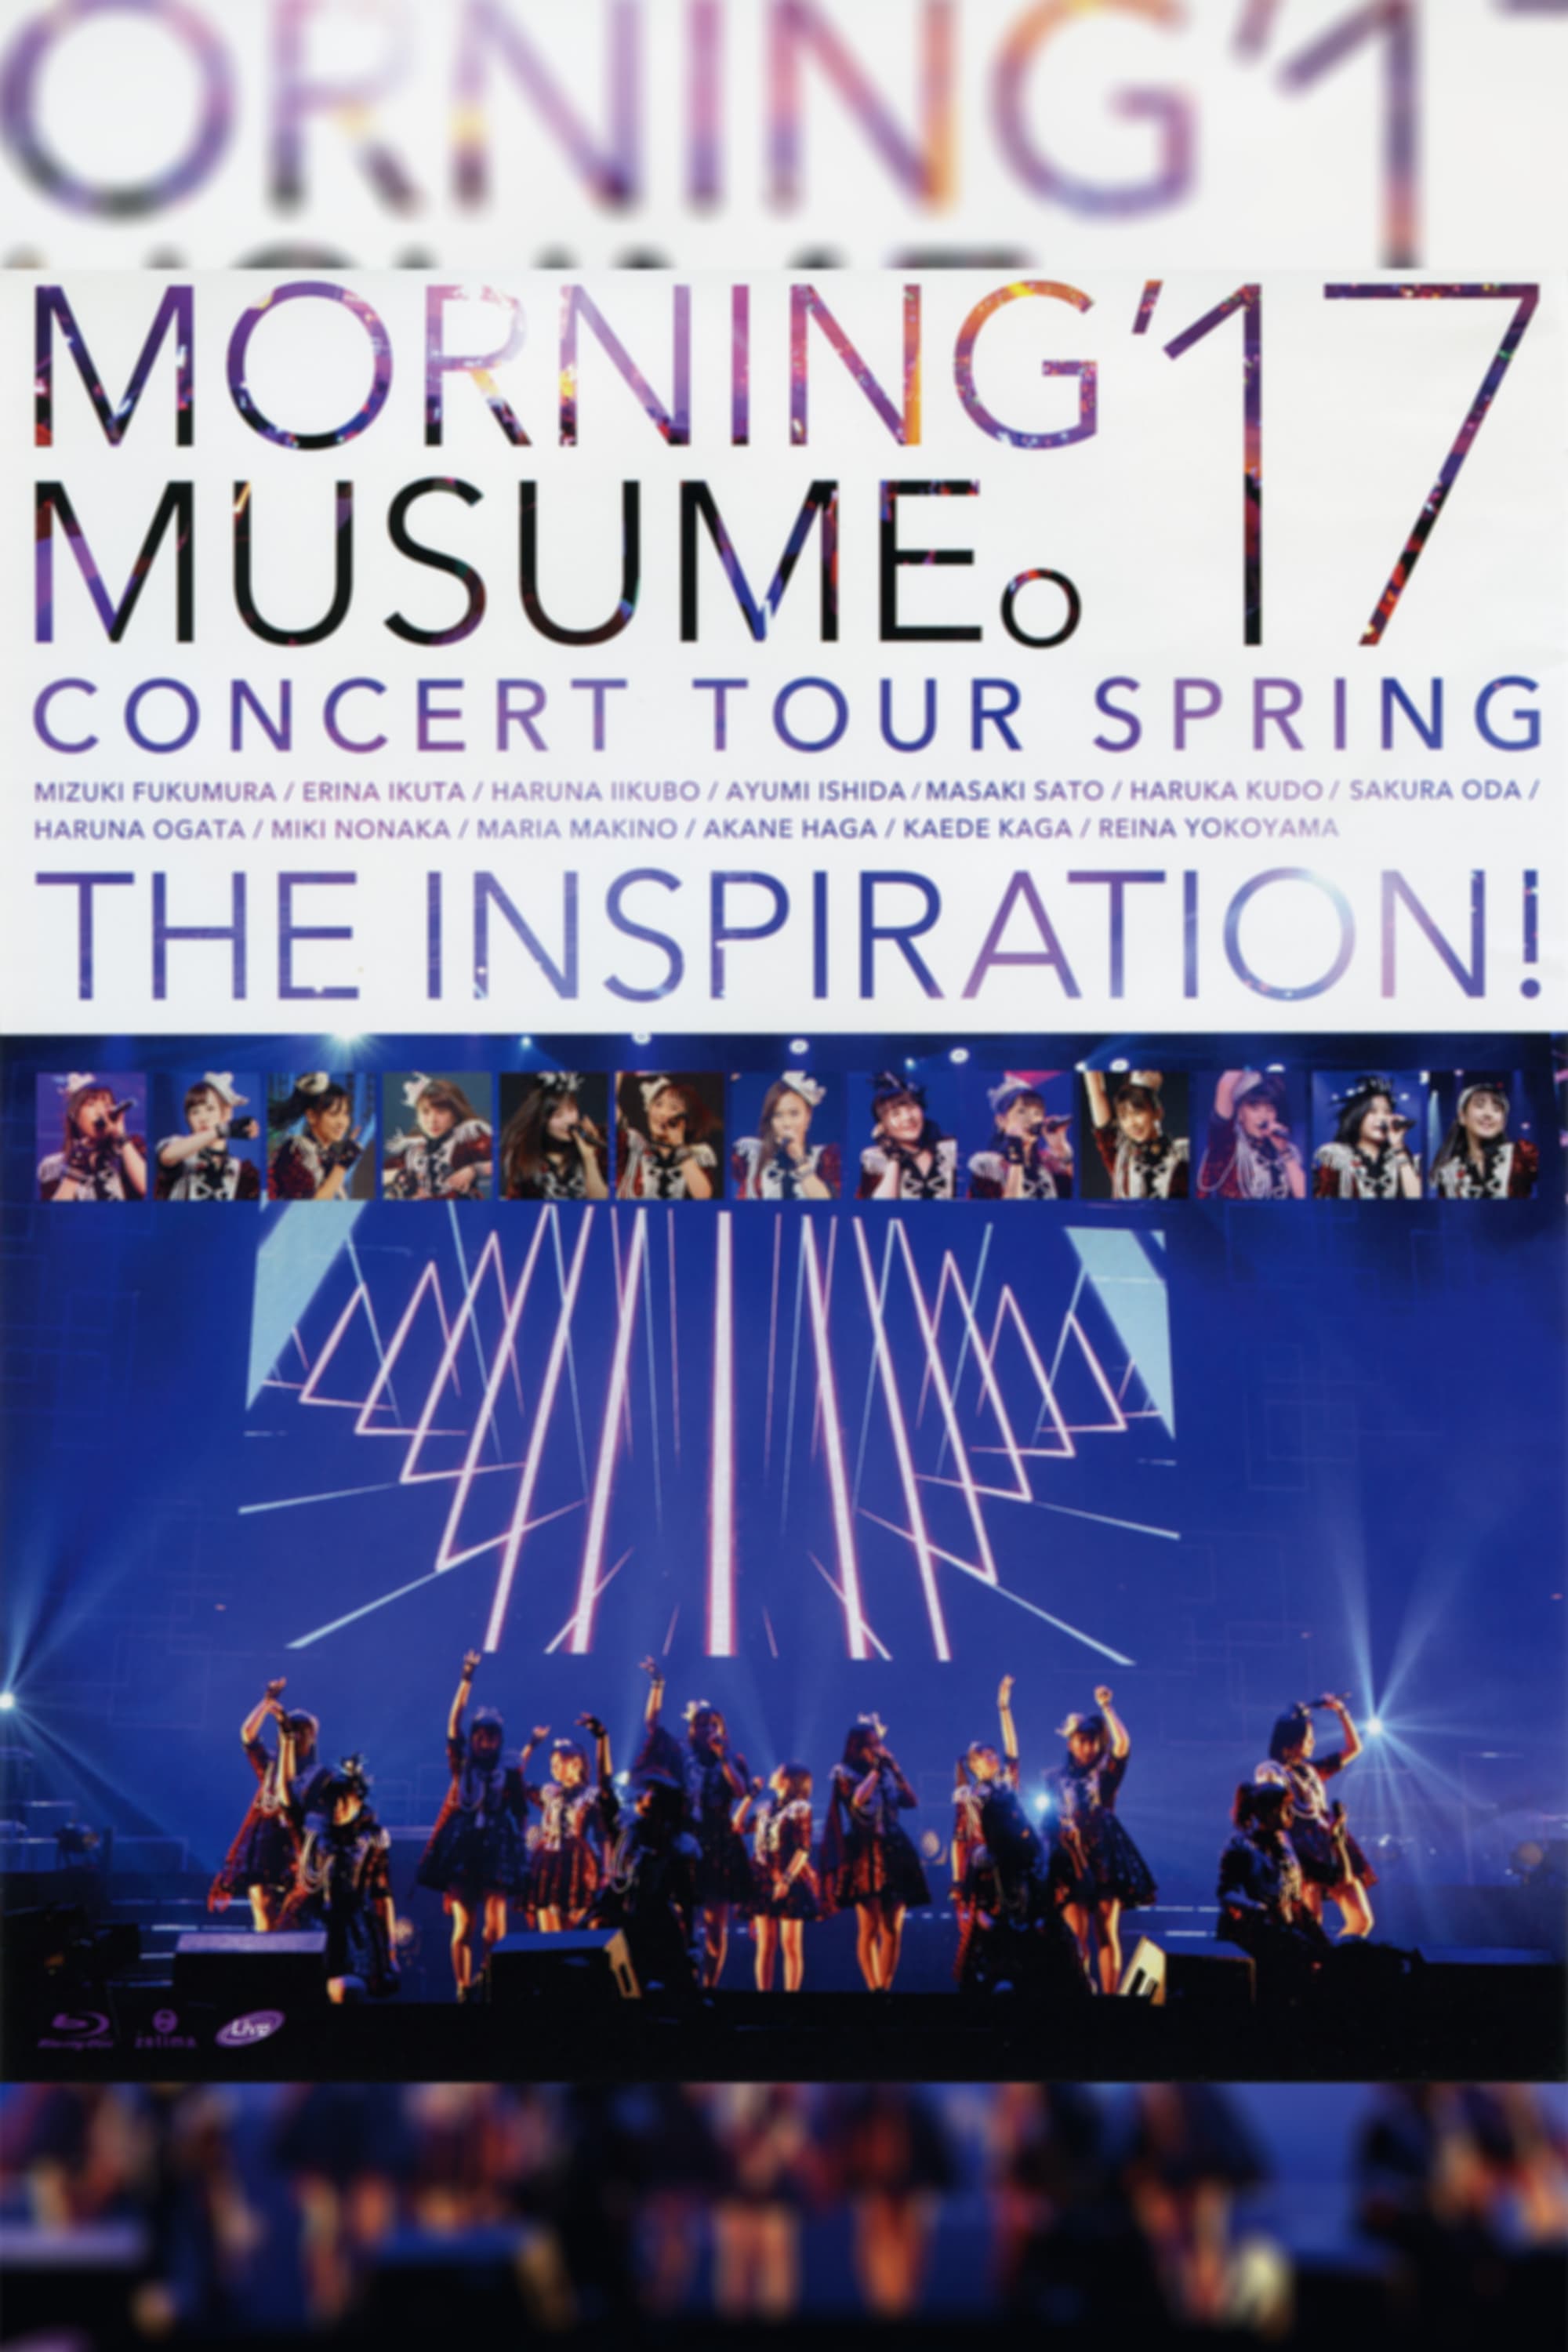 Morning Musume.'17 2017 Spring ~THE INSPIRATION!~